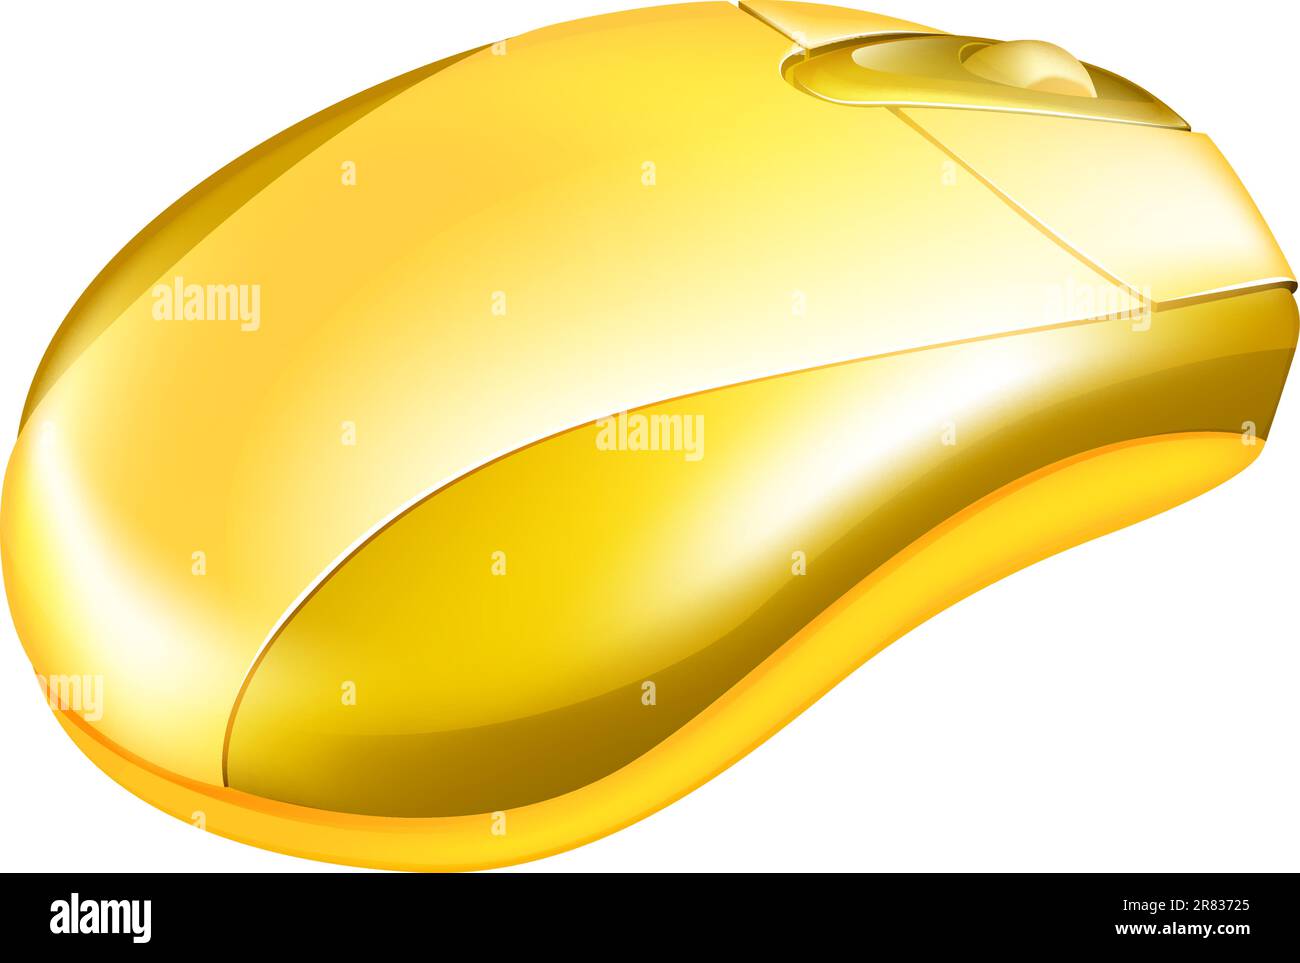 Illustration of a metallic gold computer mouse with wheel Stock Vector